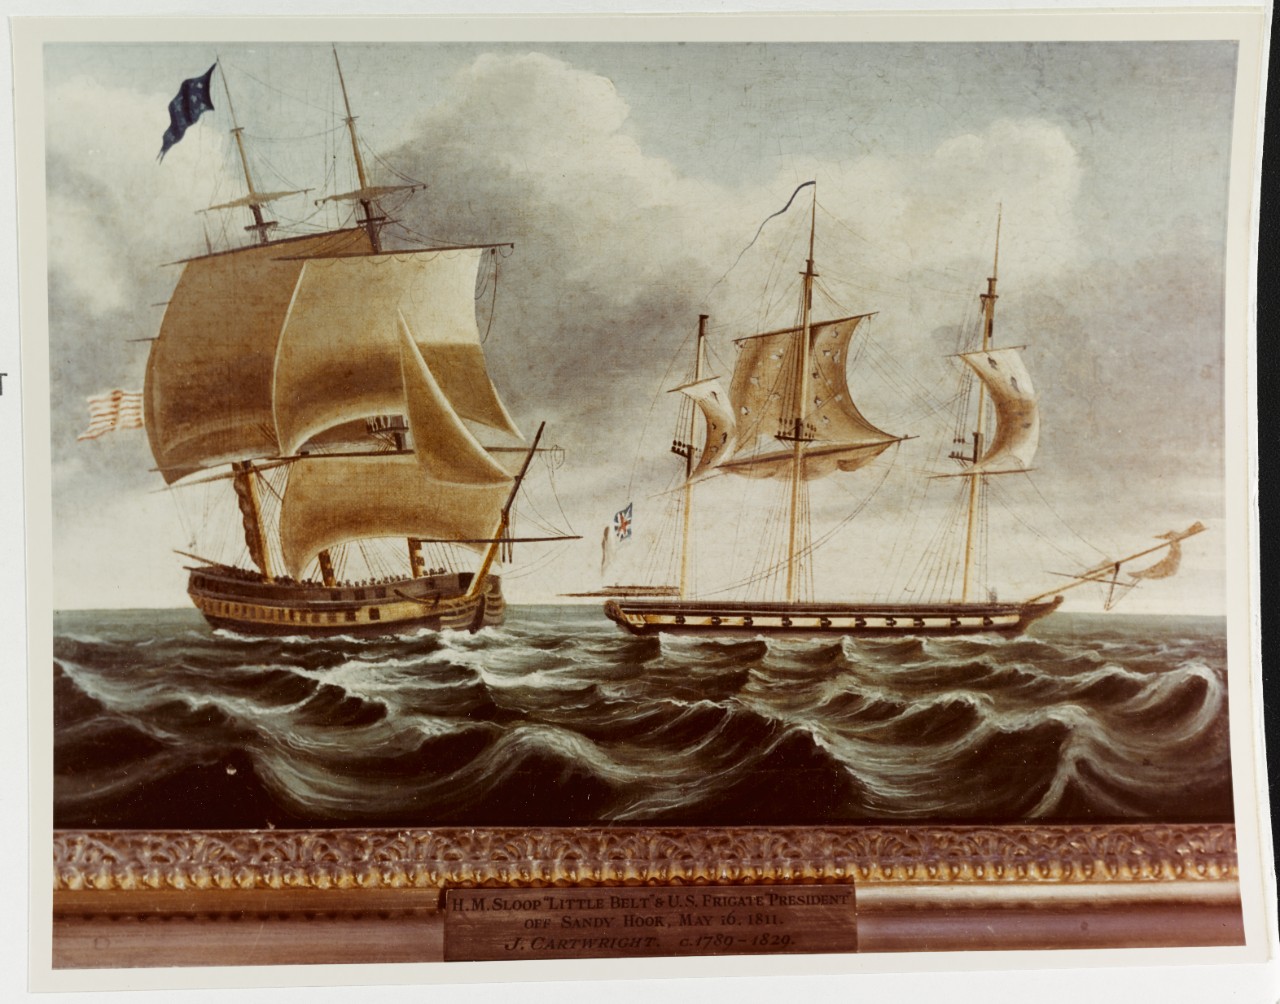 Photo #: KN-10868 Action between U.S. Frigate President and H.M. Sloop Little Belt, 16 May 1811